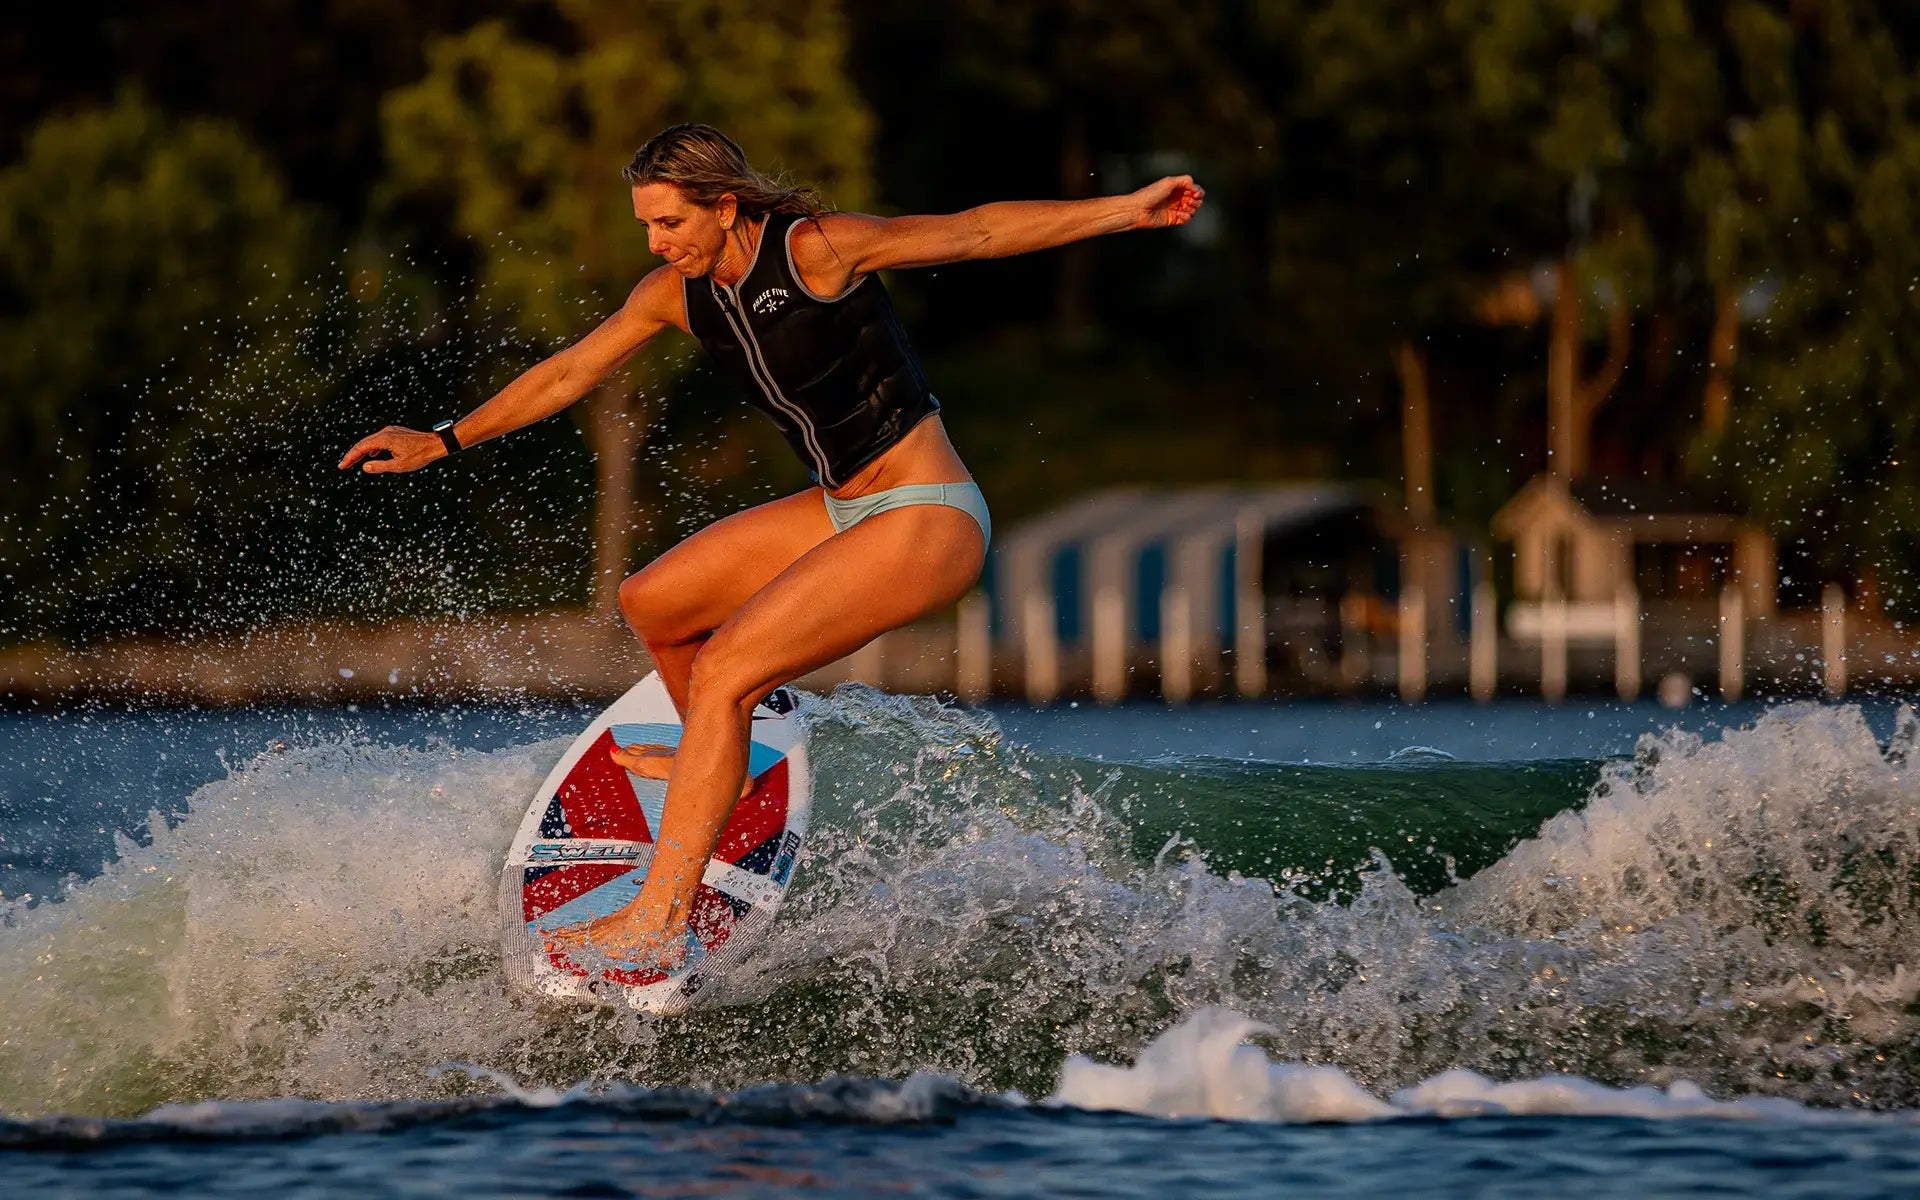 Stacia Bank, a high performance surfer, skillfully rides a wave on a surfboard, showcasing her expertise on the Phase 5 2024 Swell Wakesurf Board.